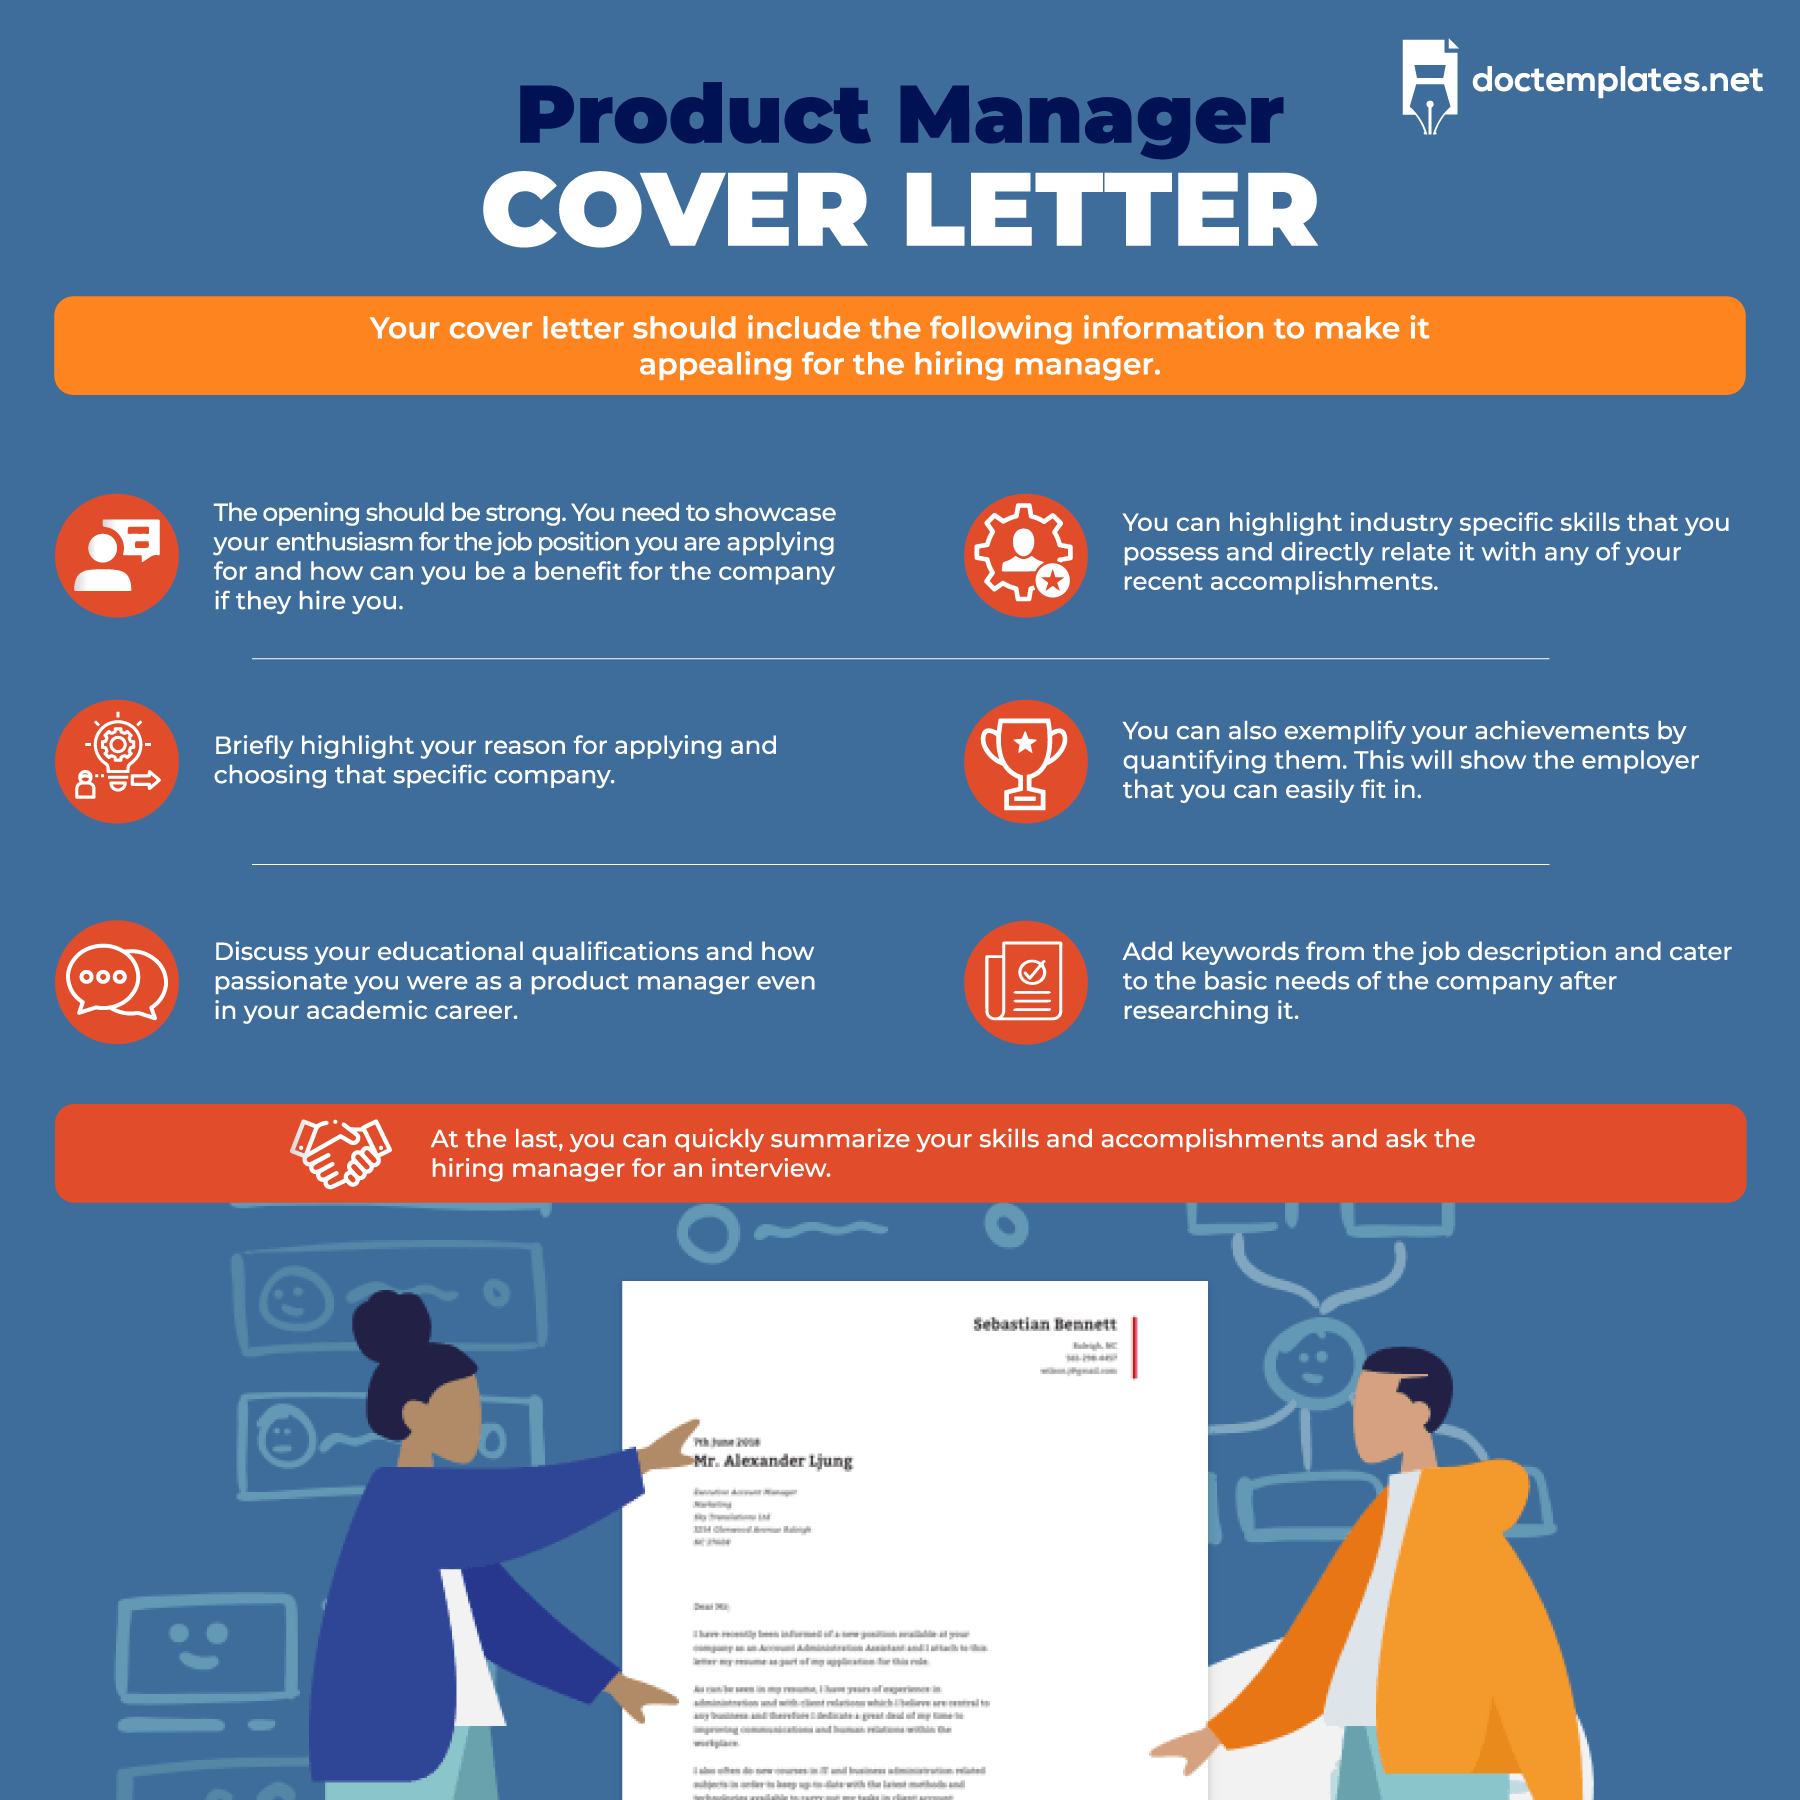 This infographic is about product manager cover letter.